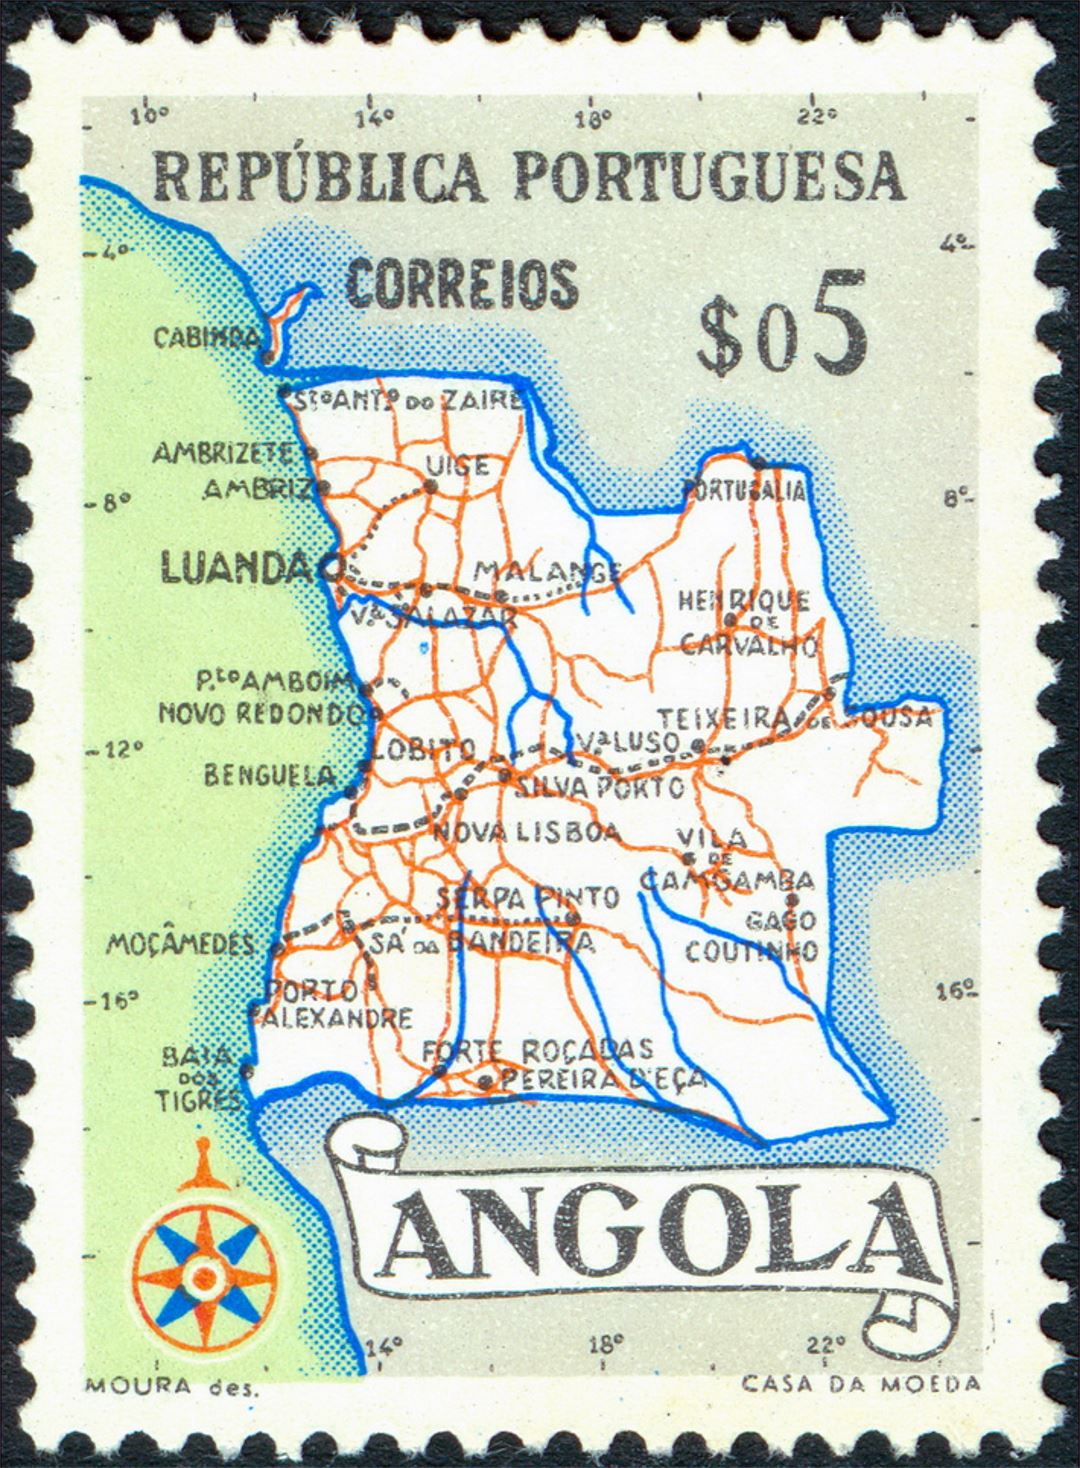 Detailed post stamp map of Angola